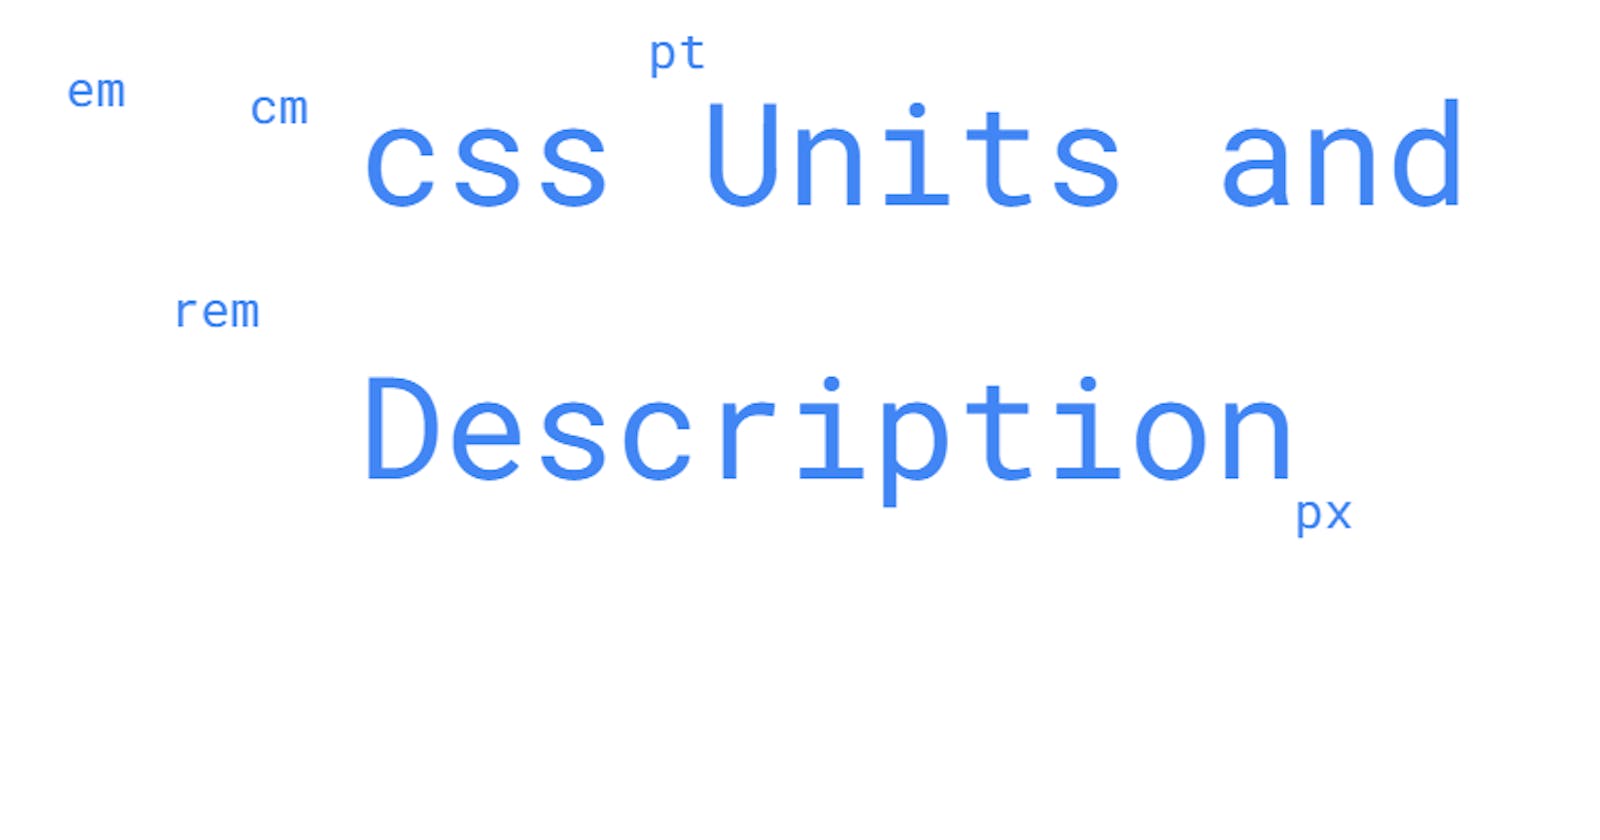 CSS Units and their description